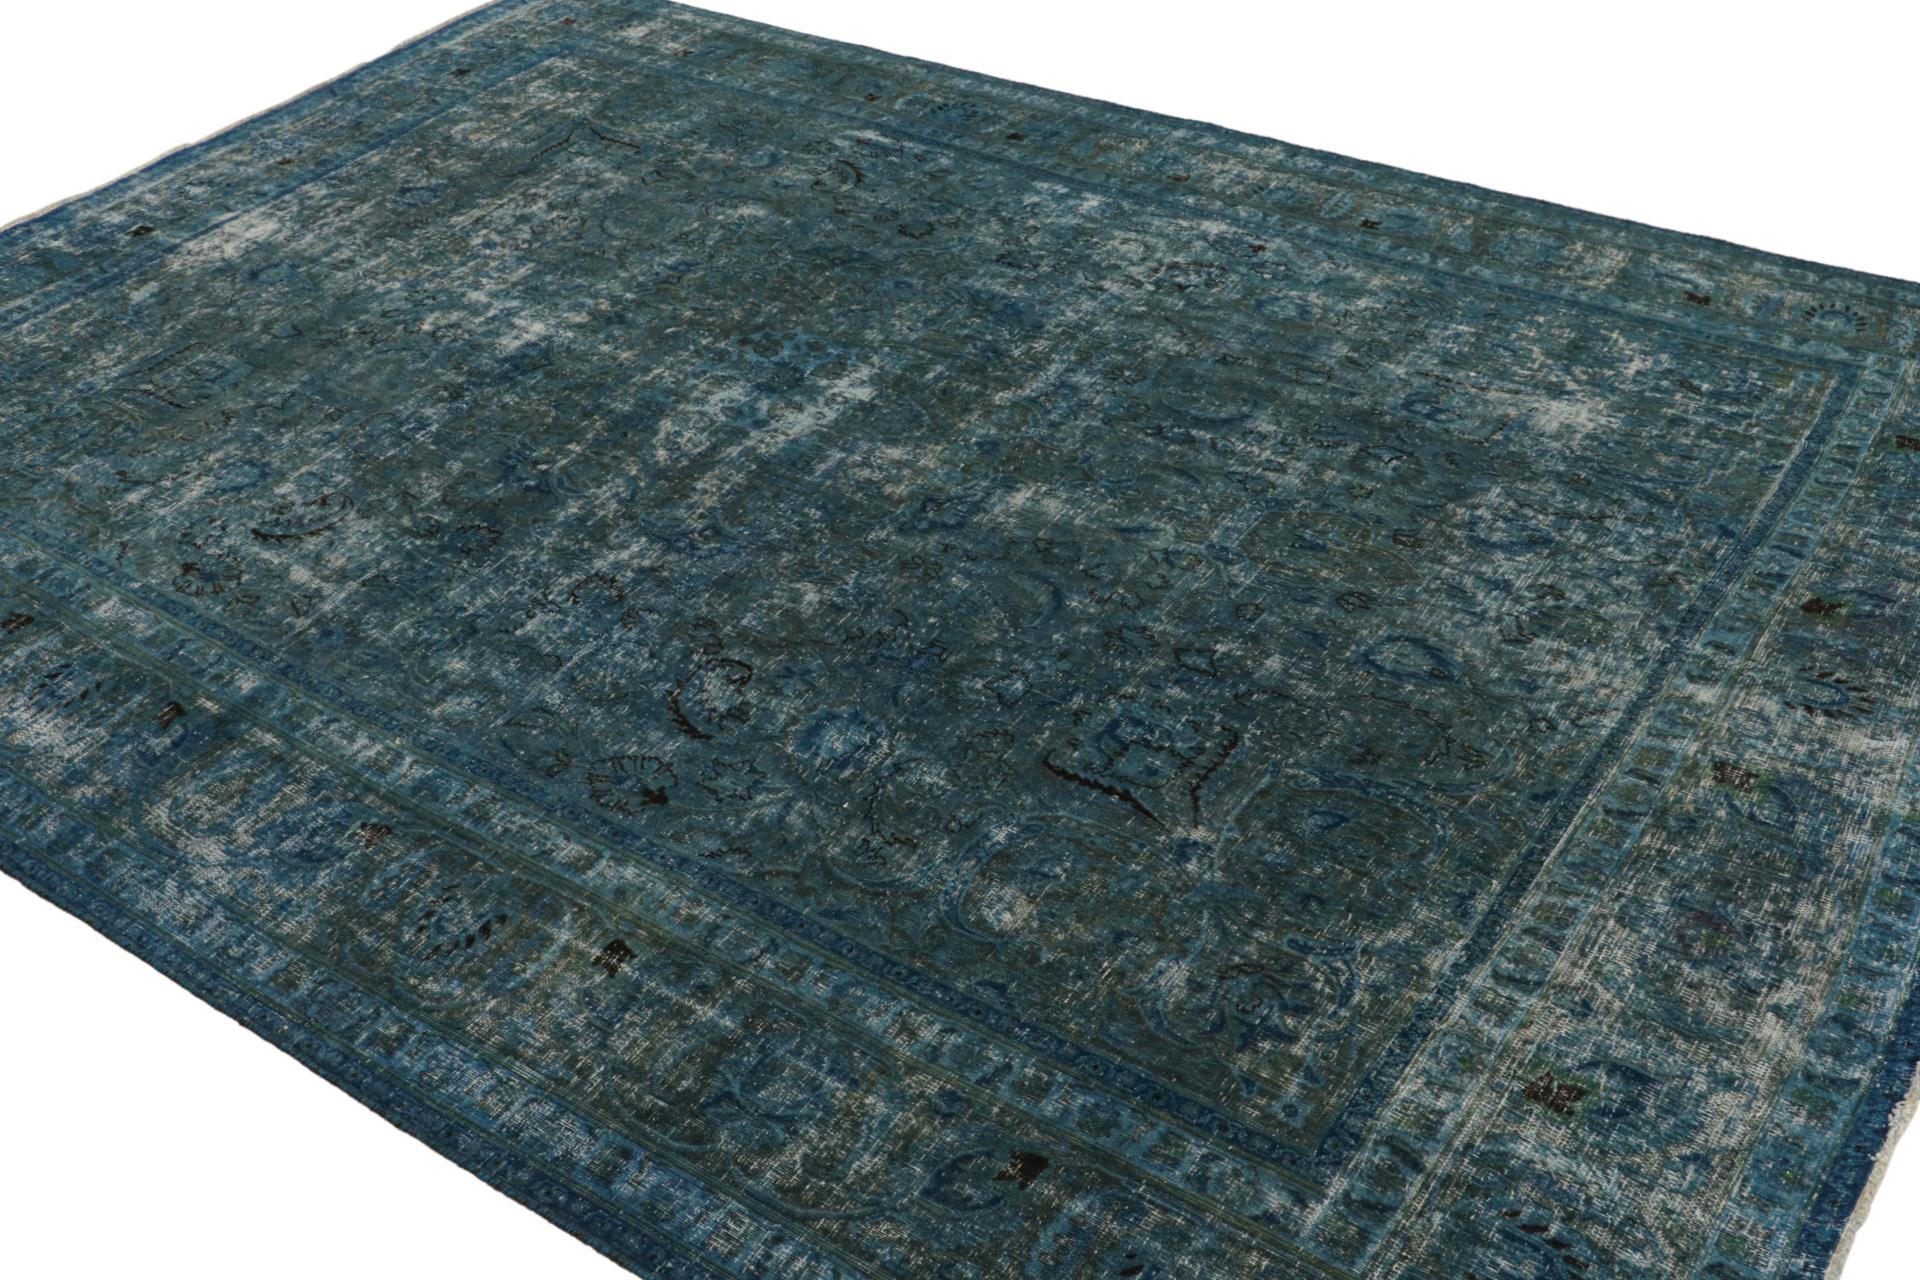 From a special new collection of overdyed rugs, a 9×12 vintage Persian rug hand-knotted in wool circa 1970-1980.

On the Design:

This vintage rug has been given a particular wash to give it this old-world look and muted style of pattern. Teal